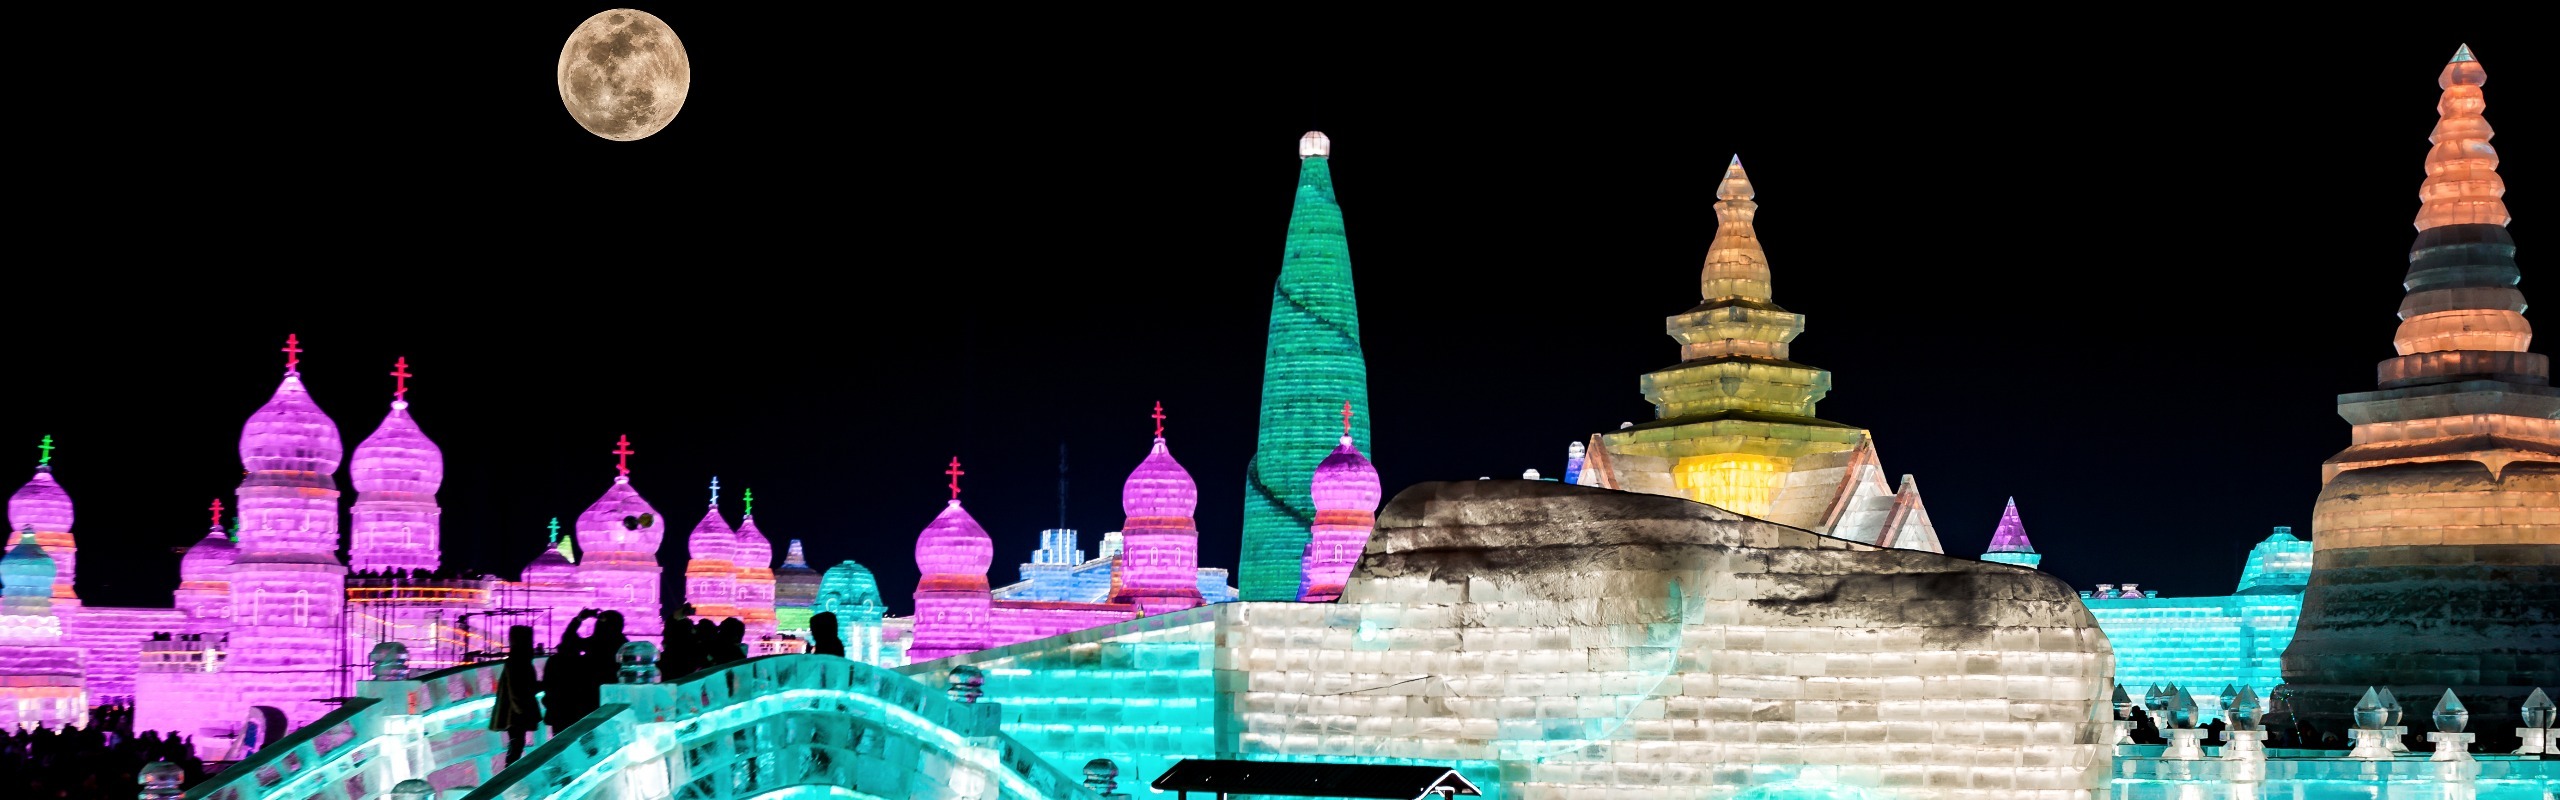 6-Day Harbin Ice Festival and Yabuli Club Med Tour